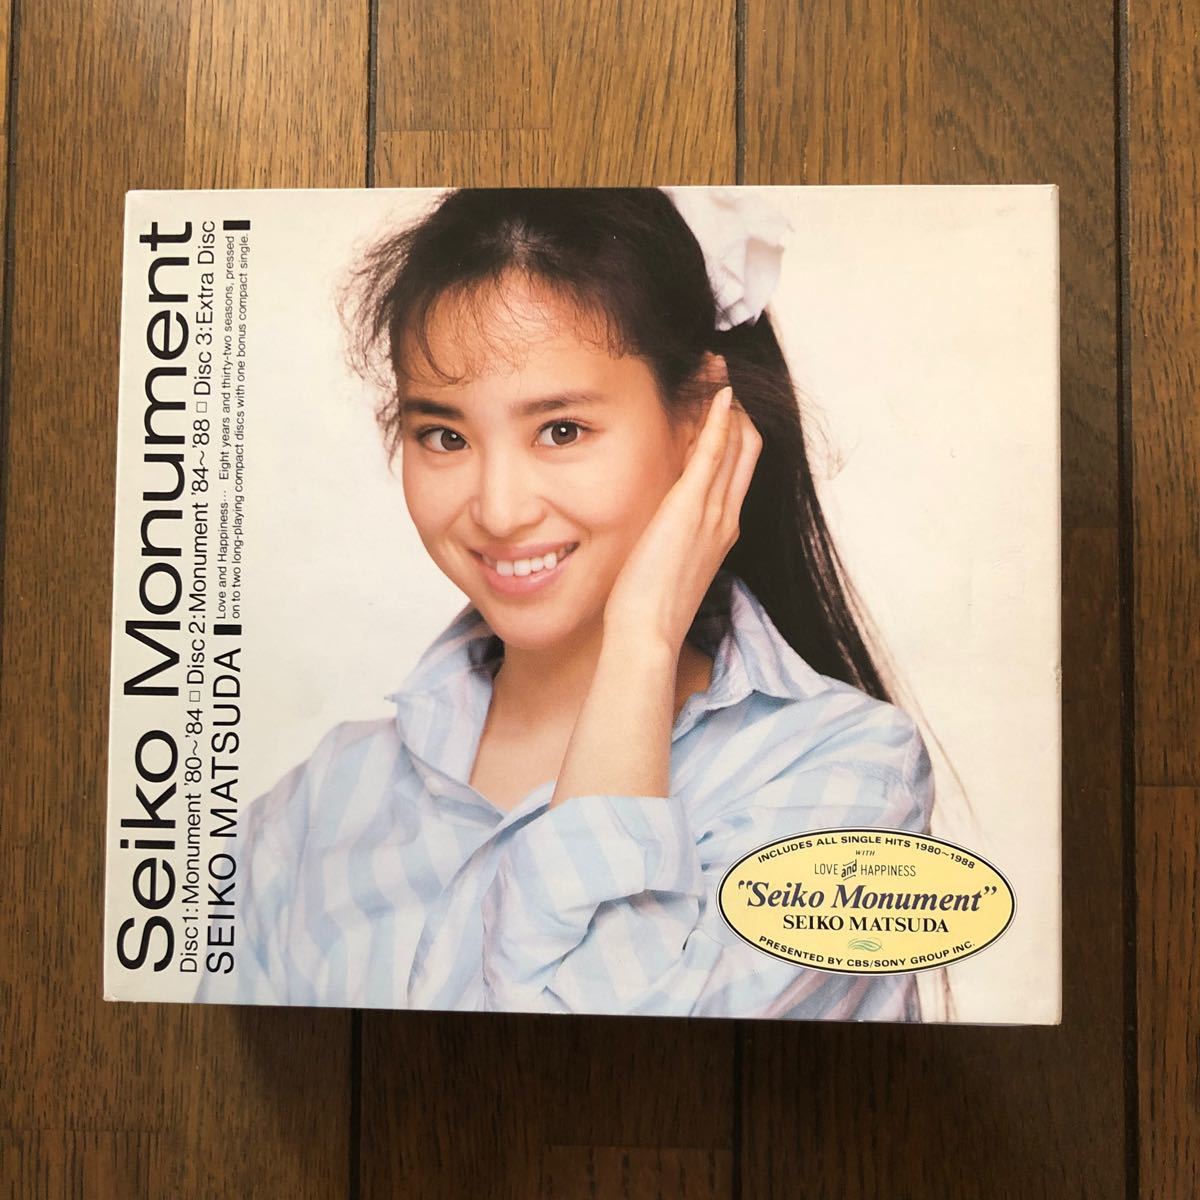 Seiko Monument 松田聖子 【Includes All Singles Hits 1980 〜 1988】CD3枚組